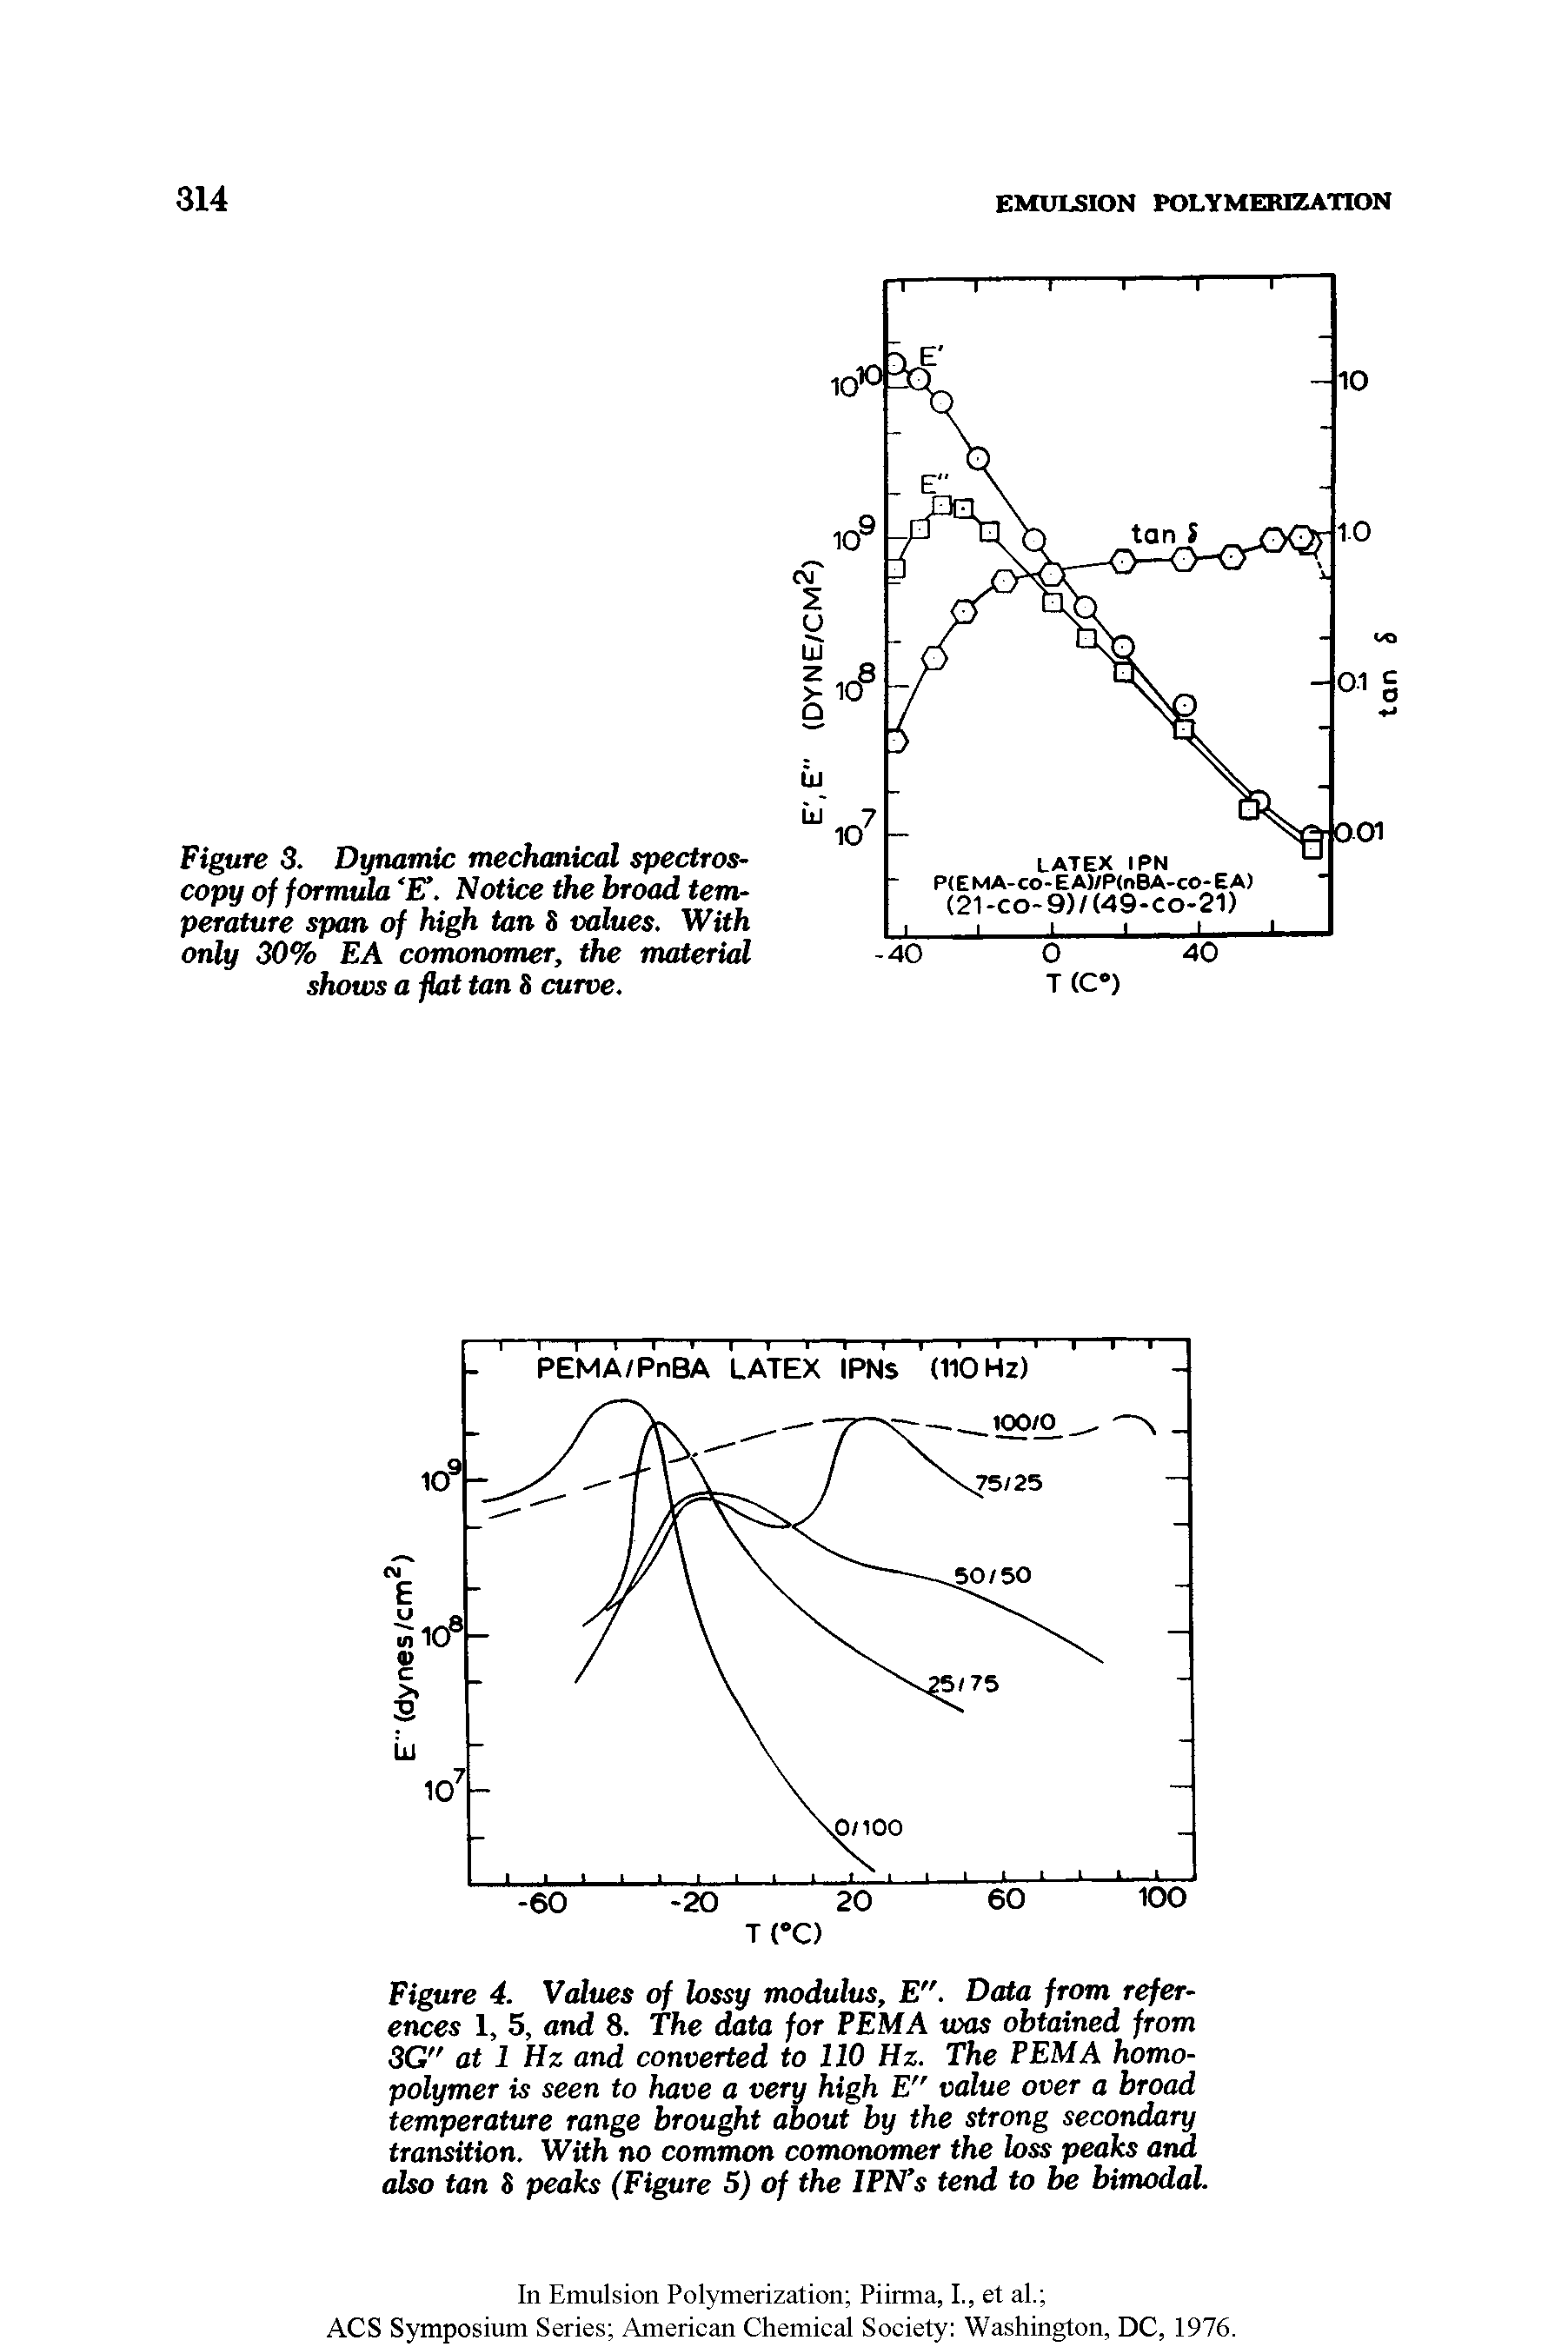 Figure 4. Values of lossy modulus, E". Data from references 1, 5, and 8. The data for PEMA was obtained from 3G" at 1 Hz and converted to 110 Hz. The PEMA homopolymer is seen to have a very high E" value over a broad temperature range brought about by the strong secondary transition. With no common comonomer the loss peaks and also tan S peaks (Figure 5) of the IPN s tend to be bimodal.